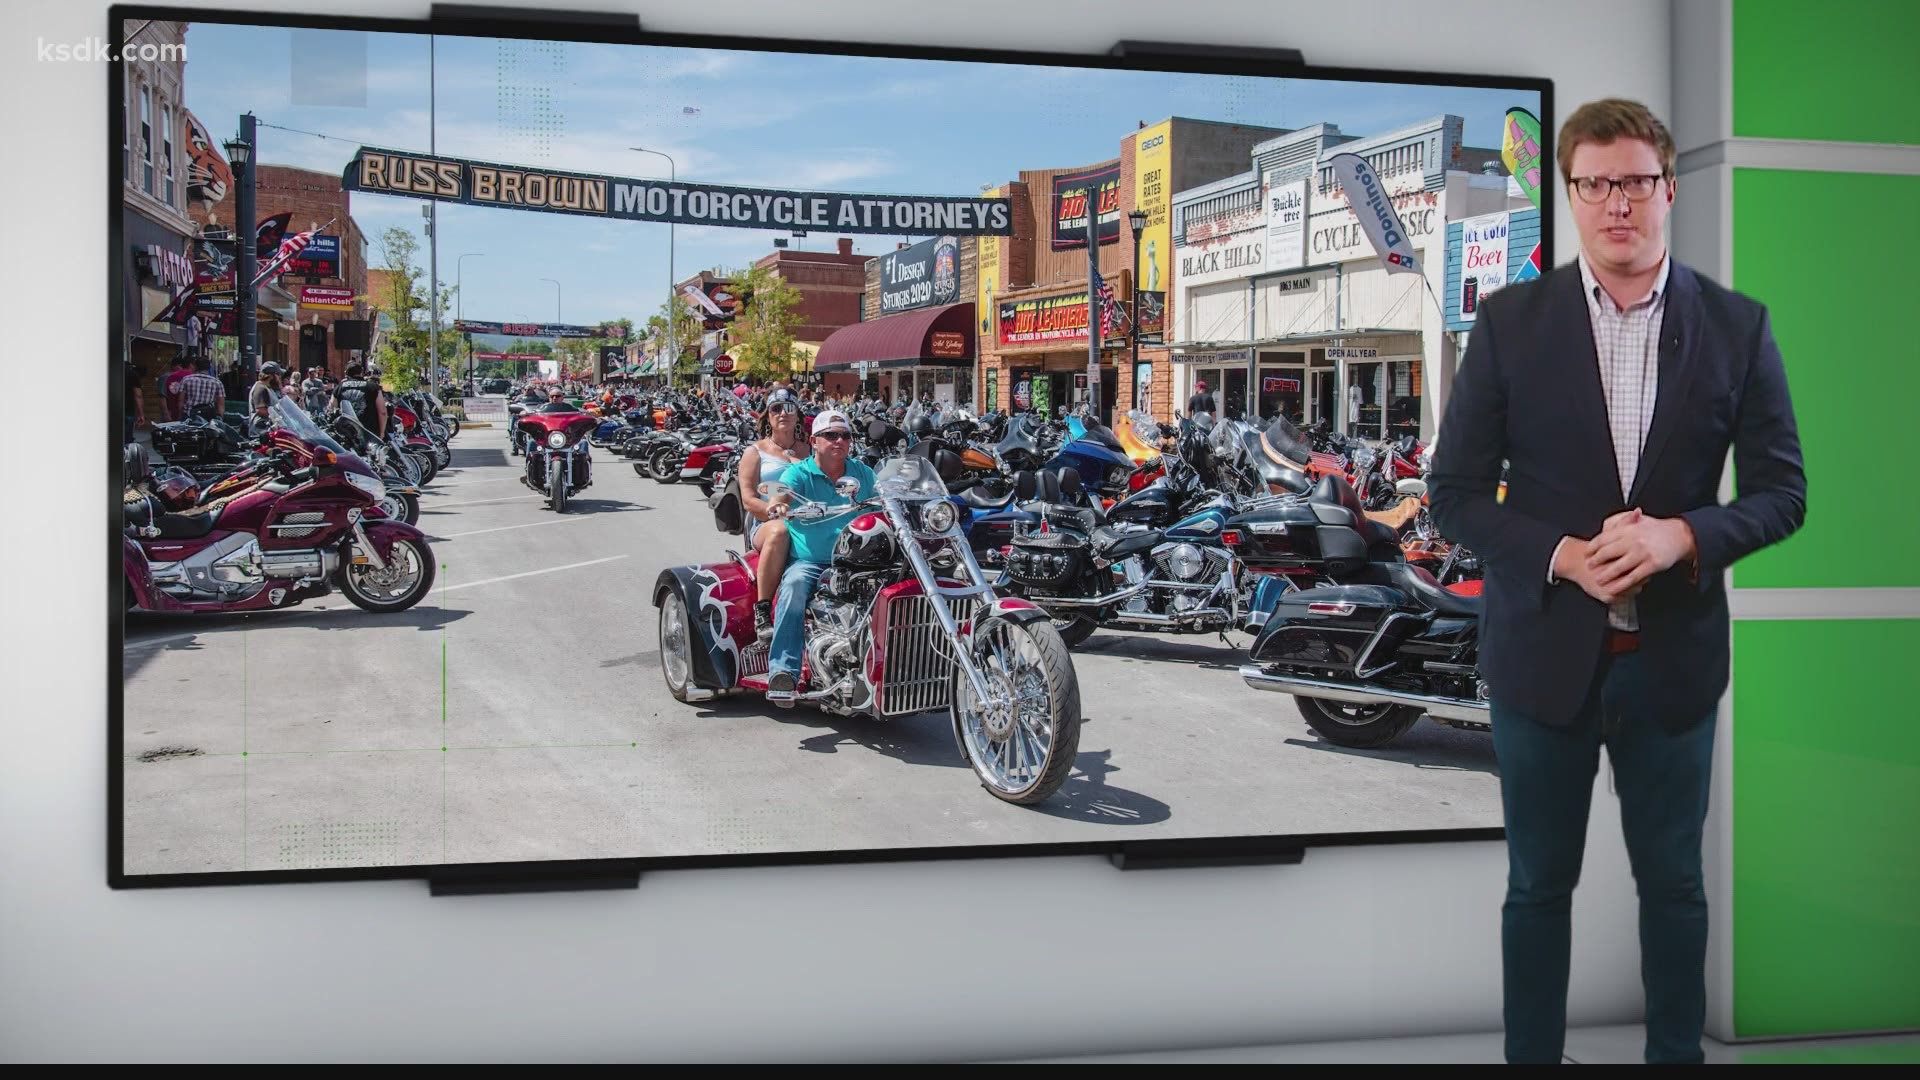 A recent study estimated nearly 265,000 COVID-19 cases could be linked to the Sturgis Motorcycle Rally in August.